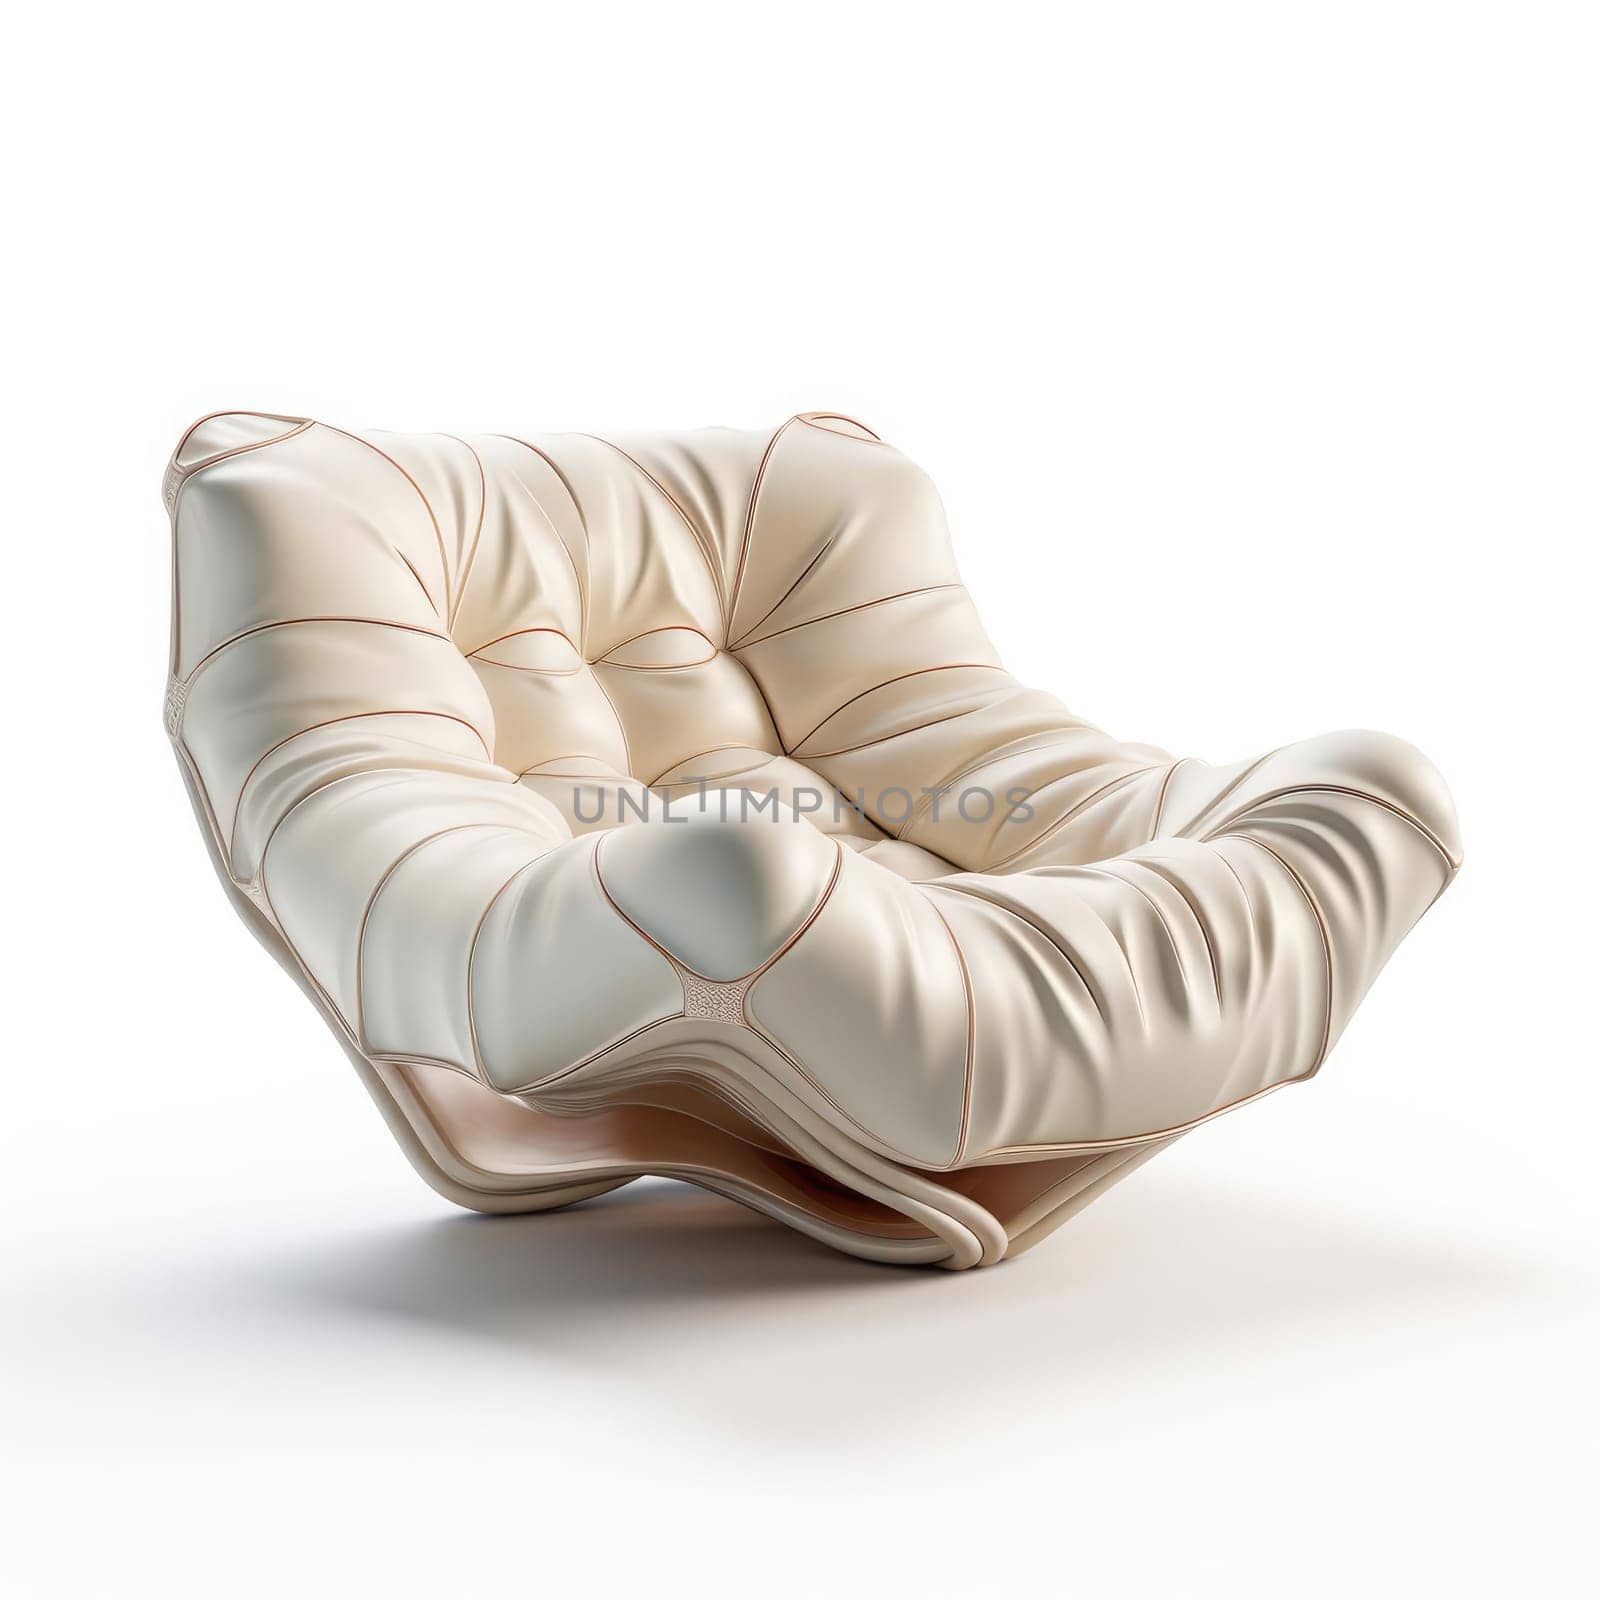 The armchair of the future by cherezoff